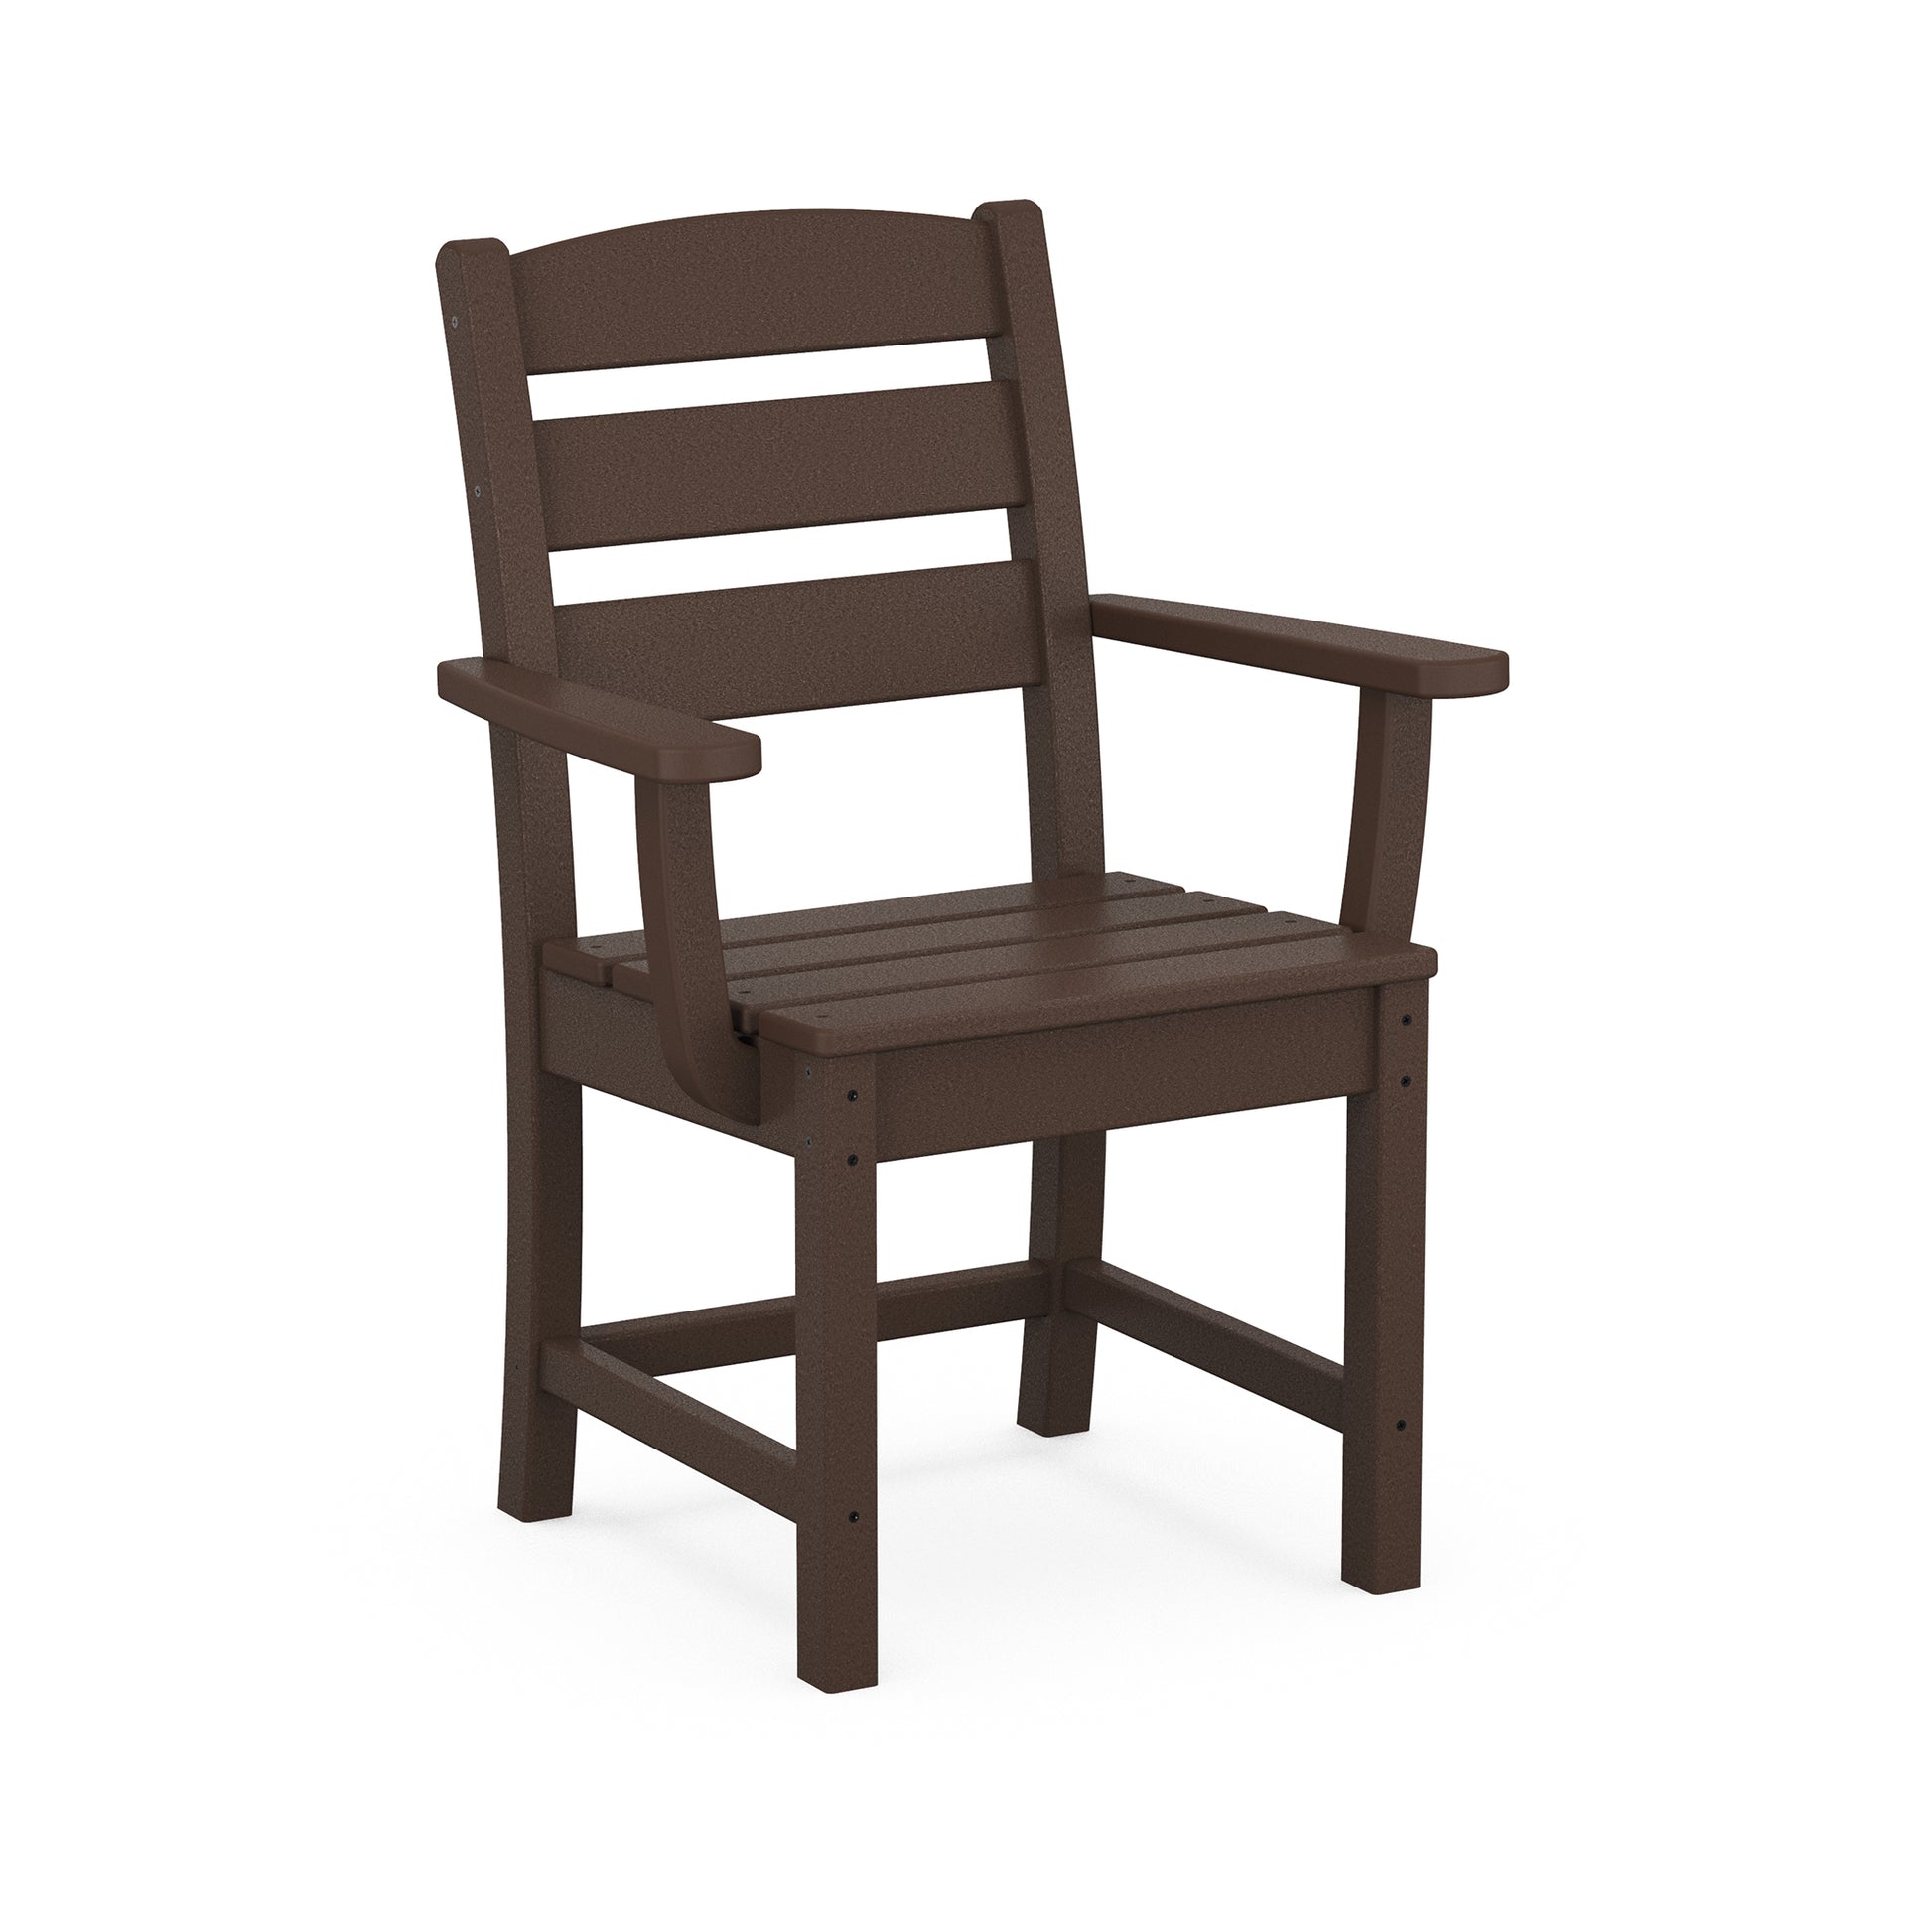 A brown POLYWOOD Lakeside Dining Arm Chair with a tall back and broad armrests, designed for outdoor environments, displayed on a plain white background.